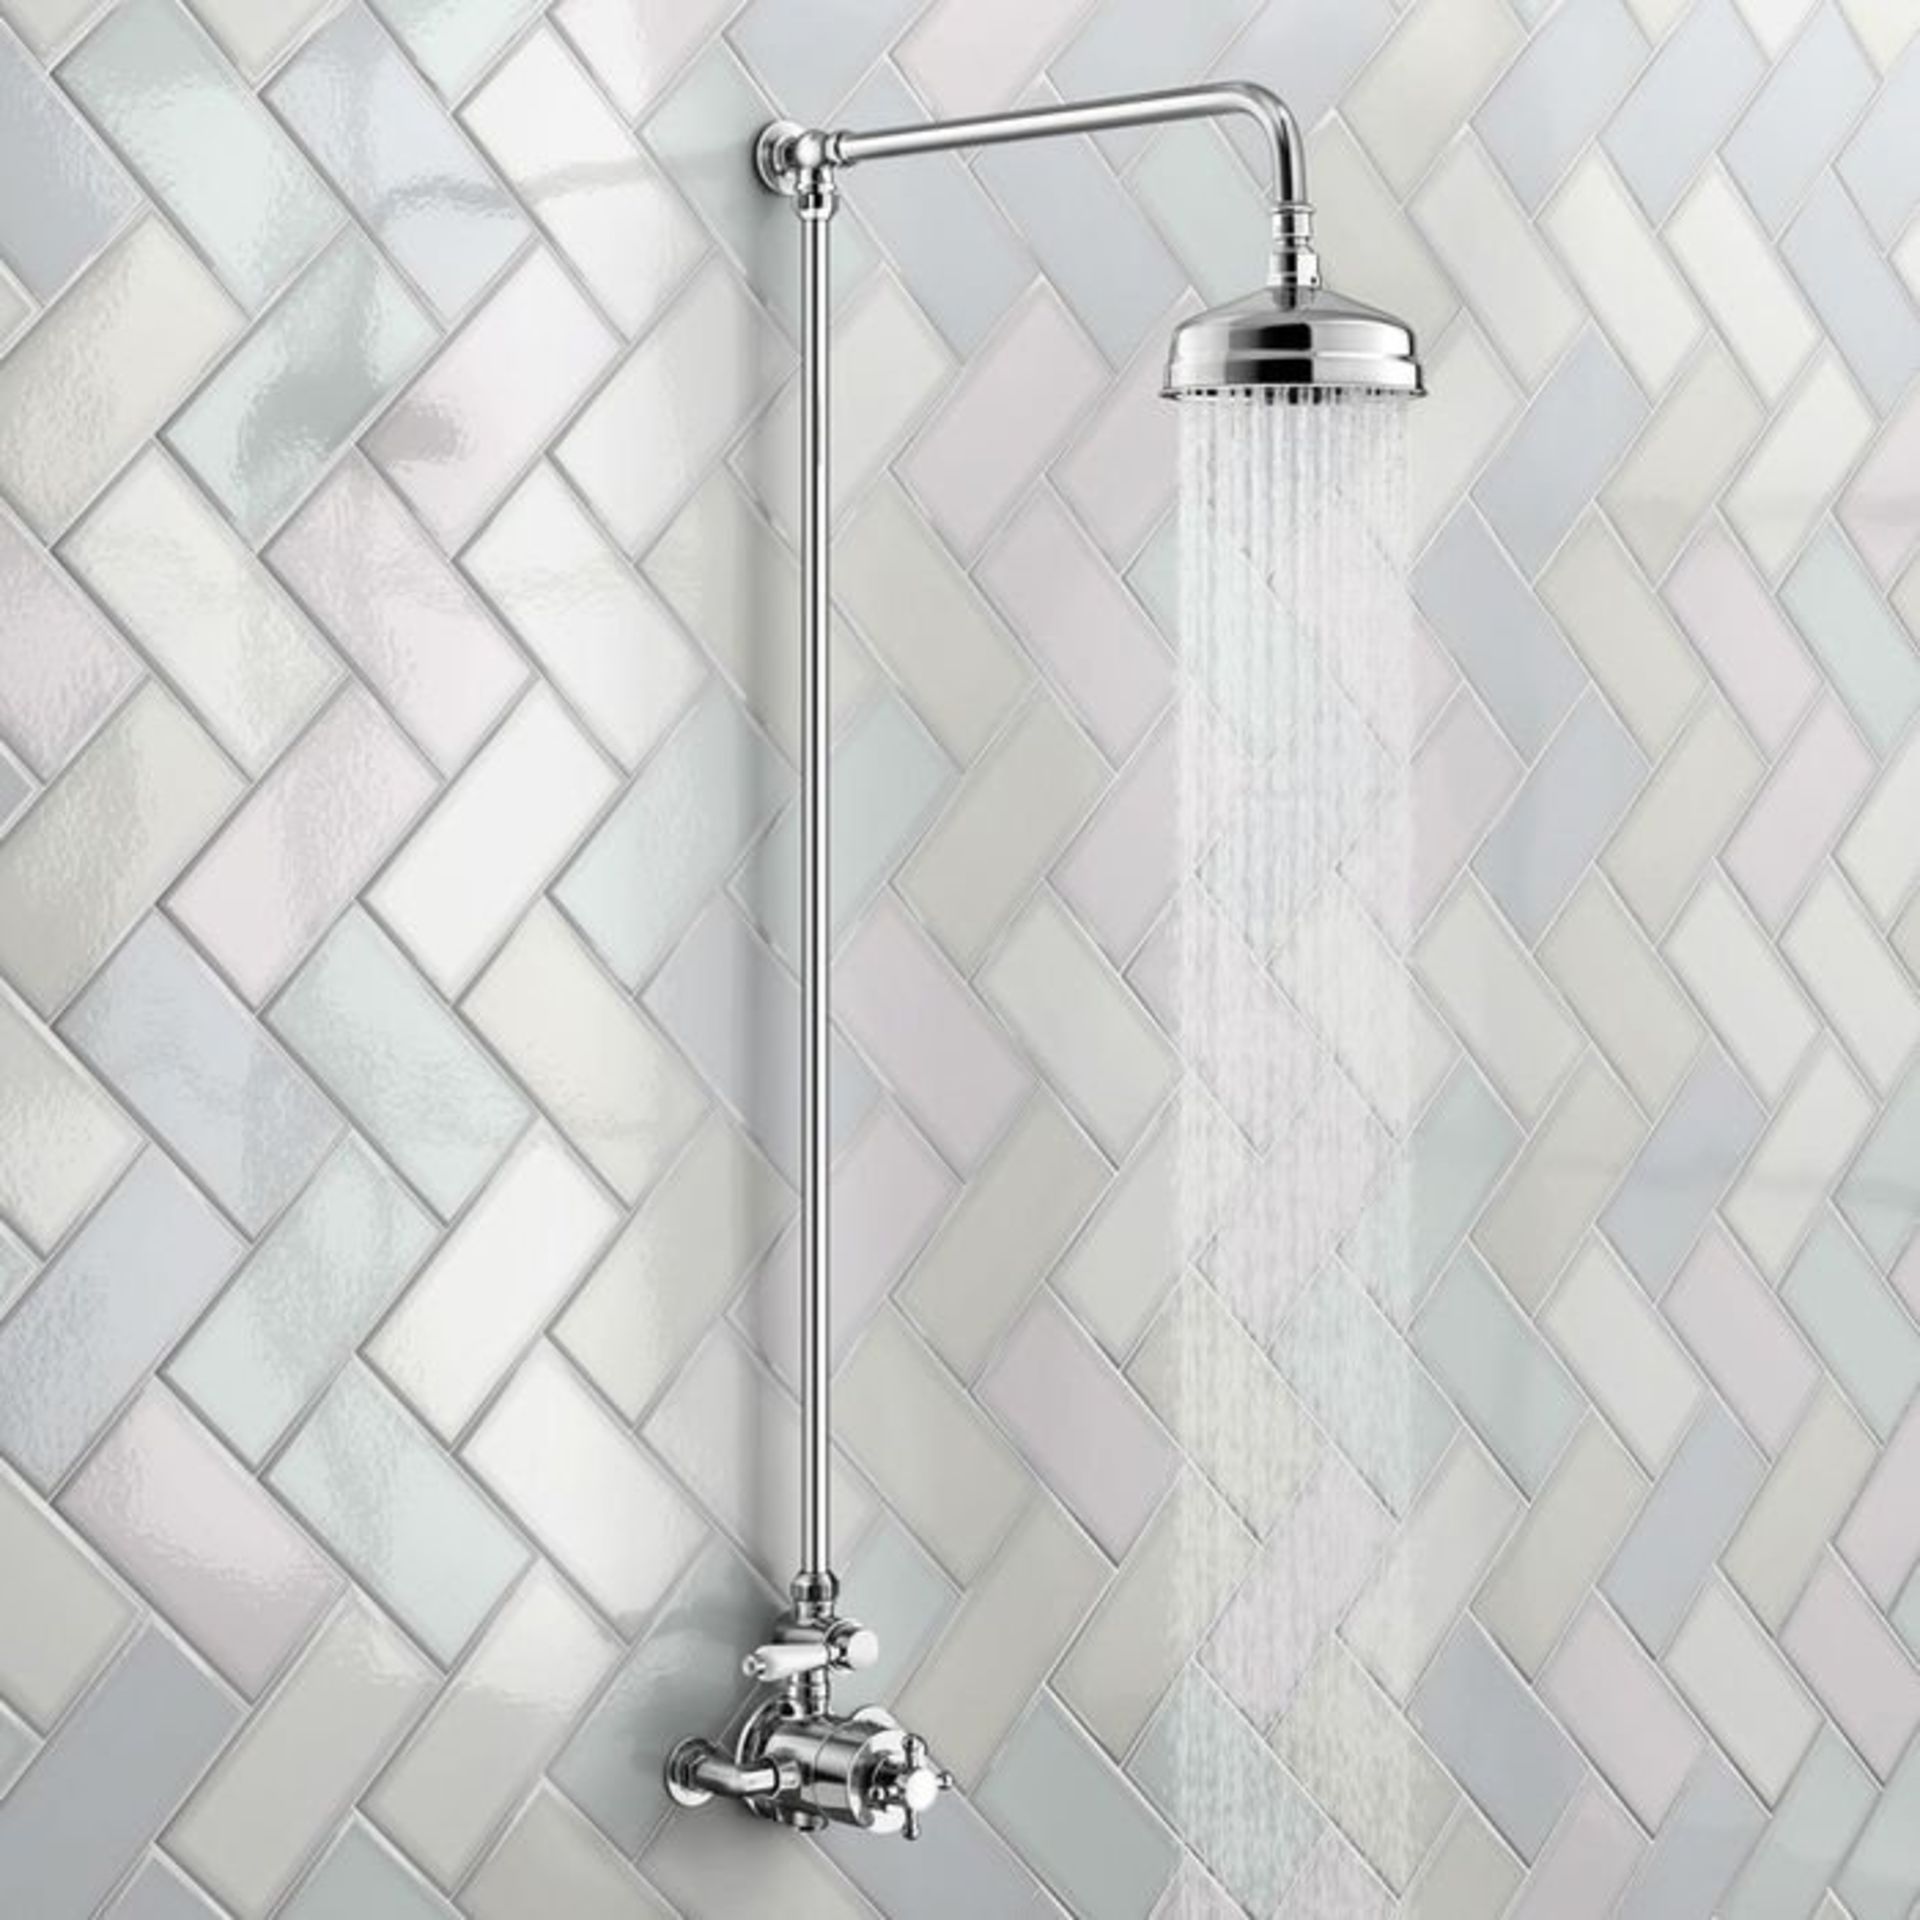 (H27) Traditional Exposed Thermostatic Shower Kit & Medium Head. Traditional exposed valve completes